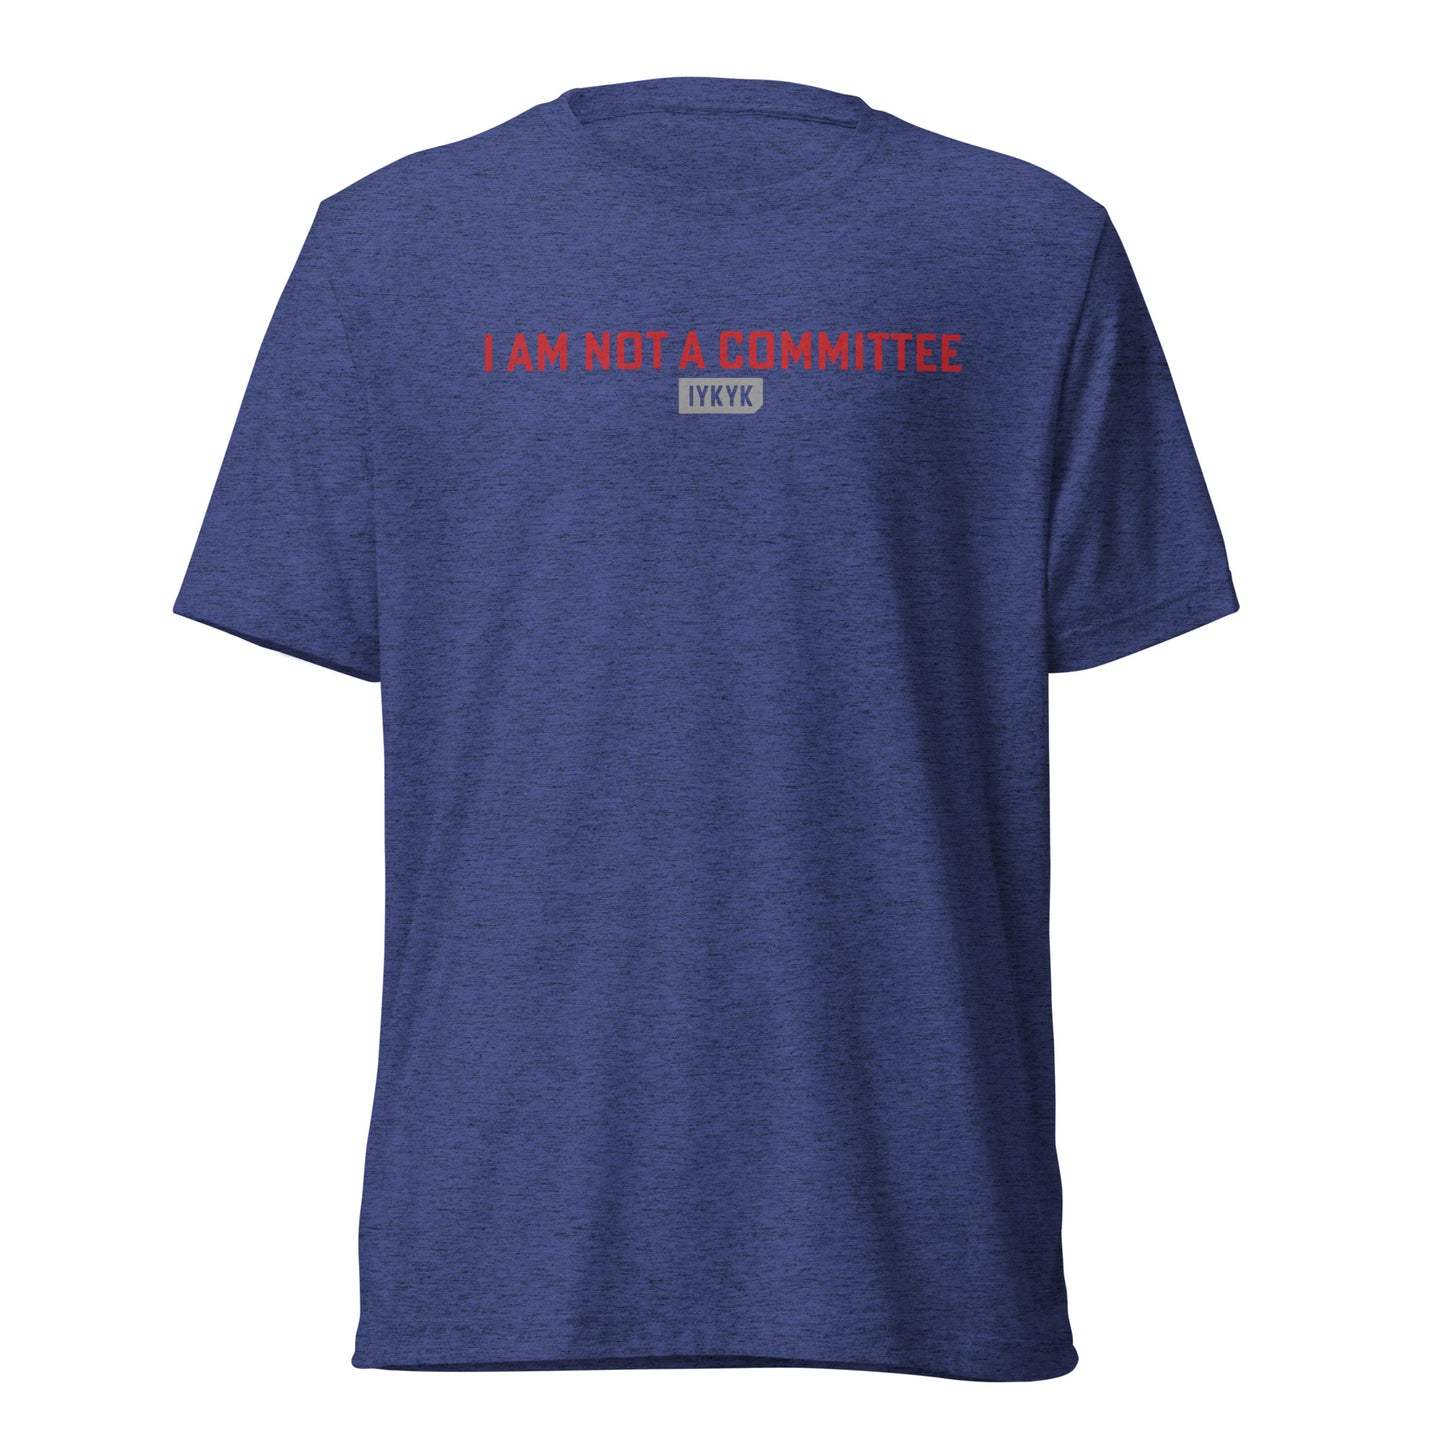 Premium Everyday I Am Not A Committee Star Wars Tee